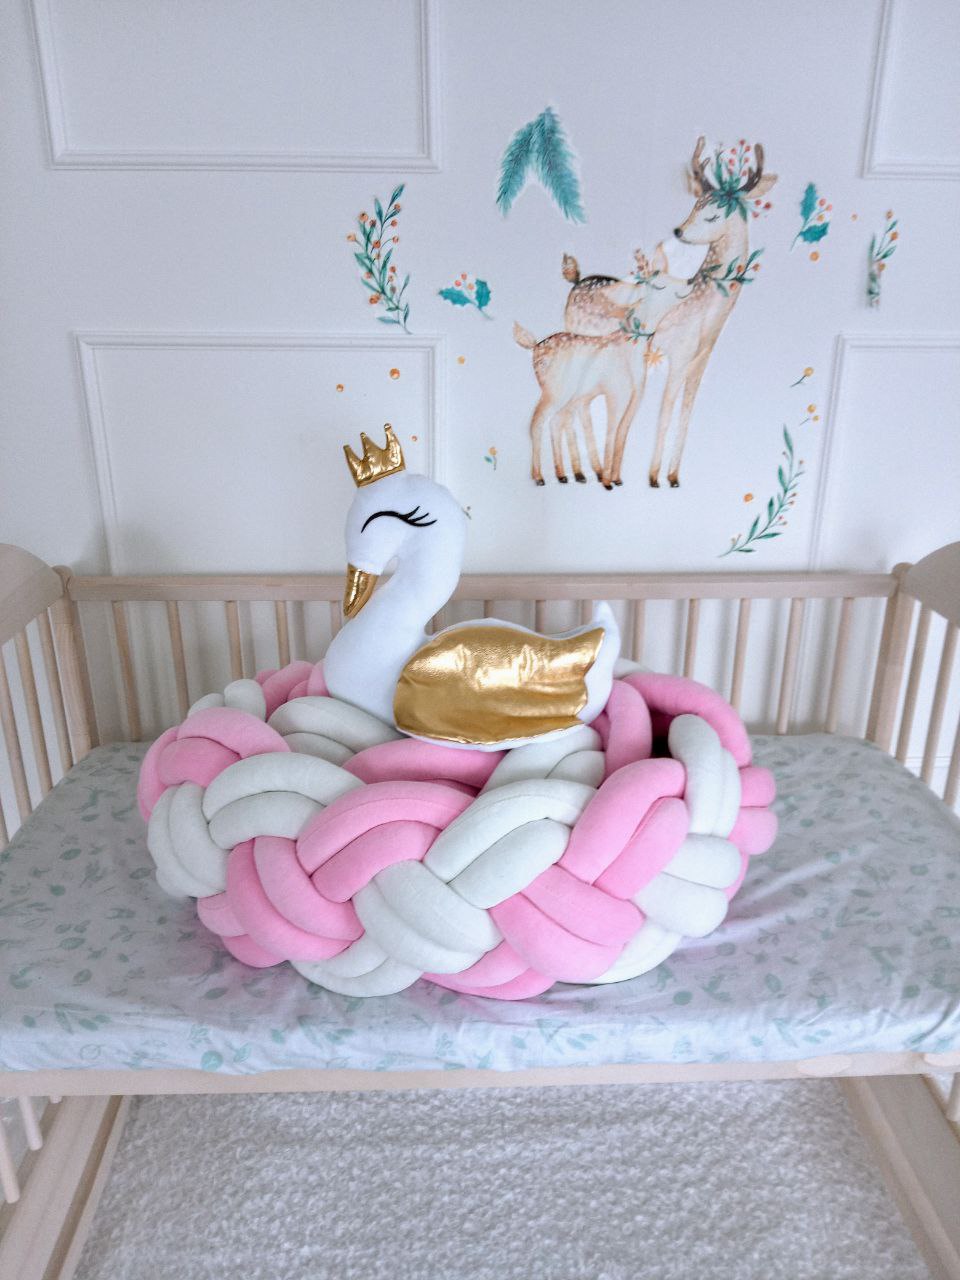 Double braided crib bumper in white and pink color with swan pillow on crib